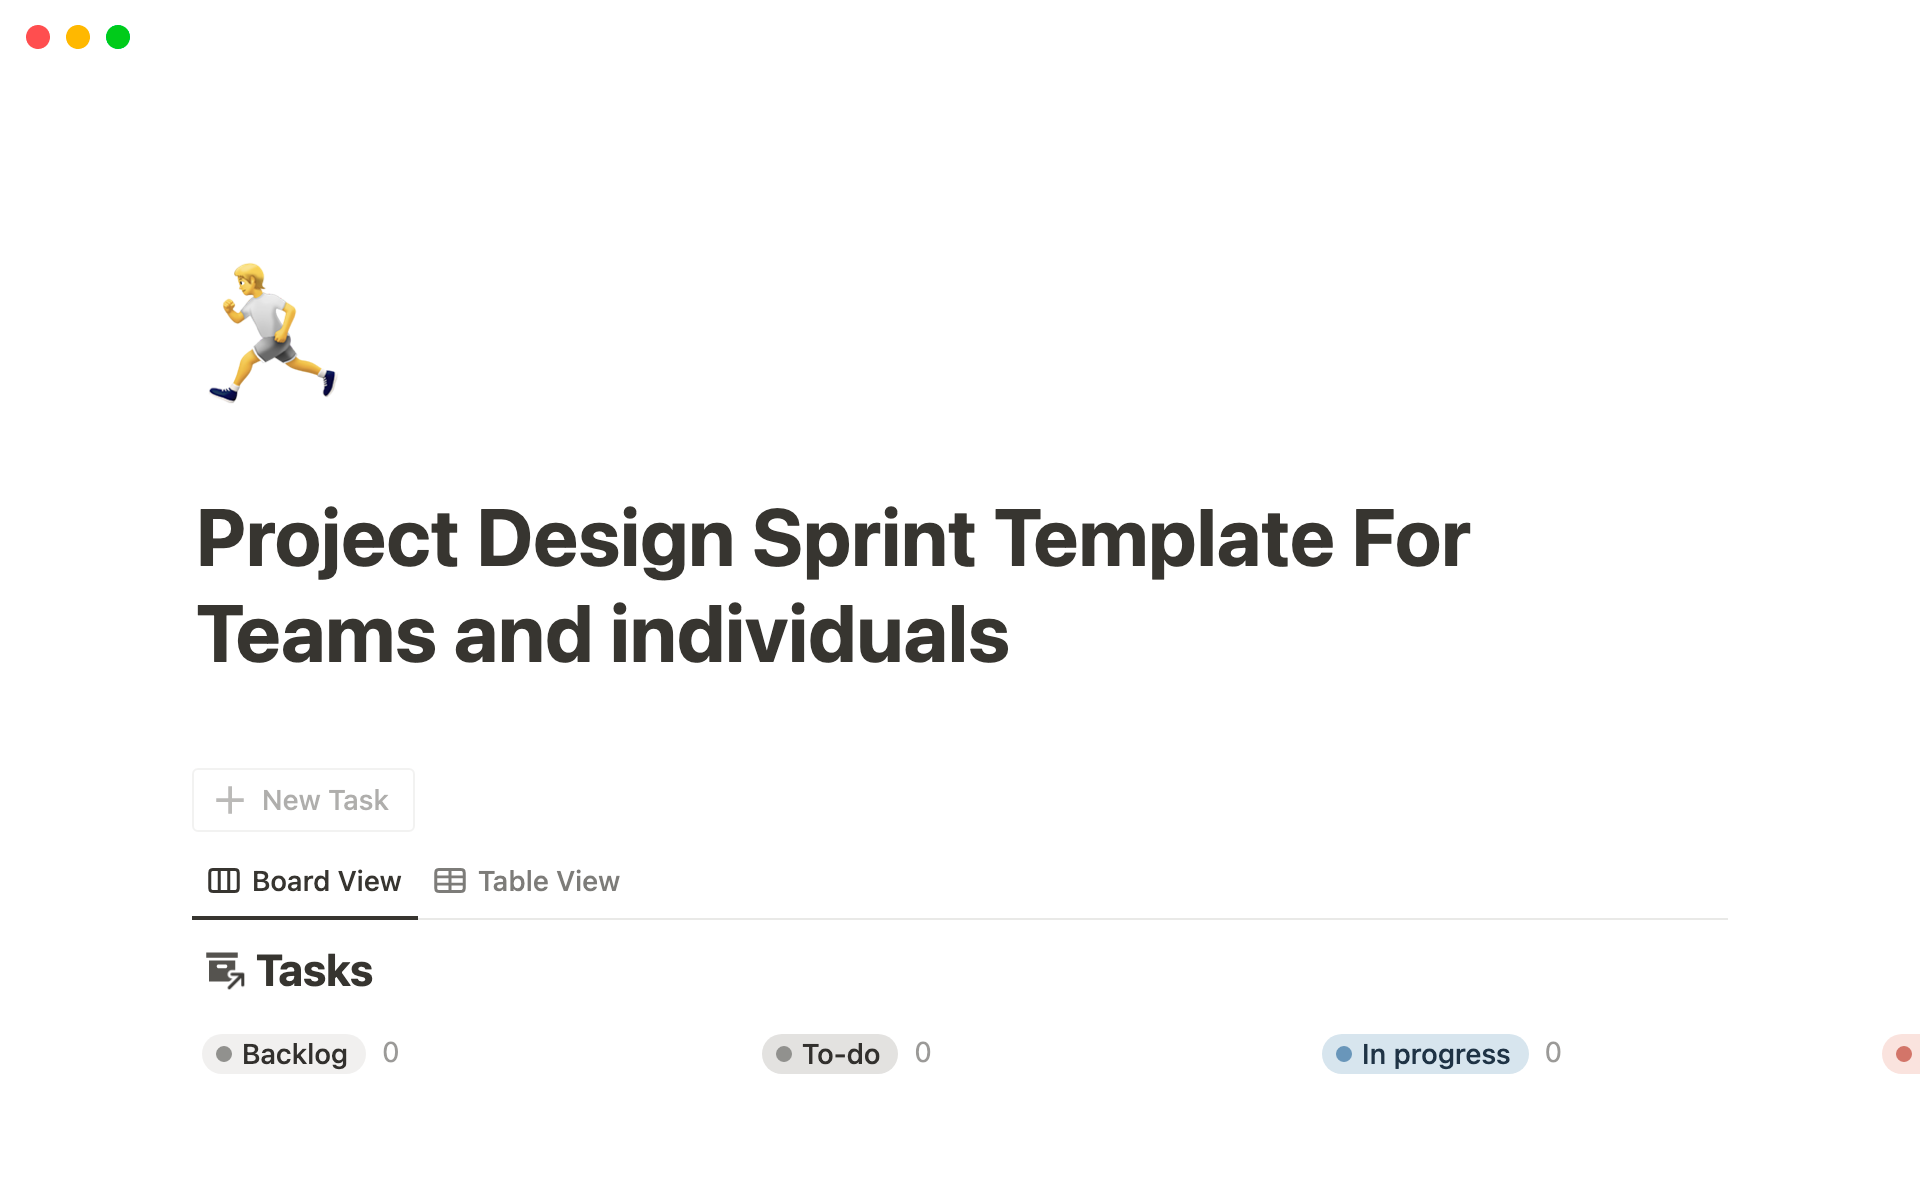 Making planing and executing design sprints easy for teams